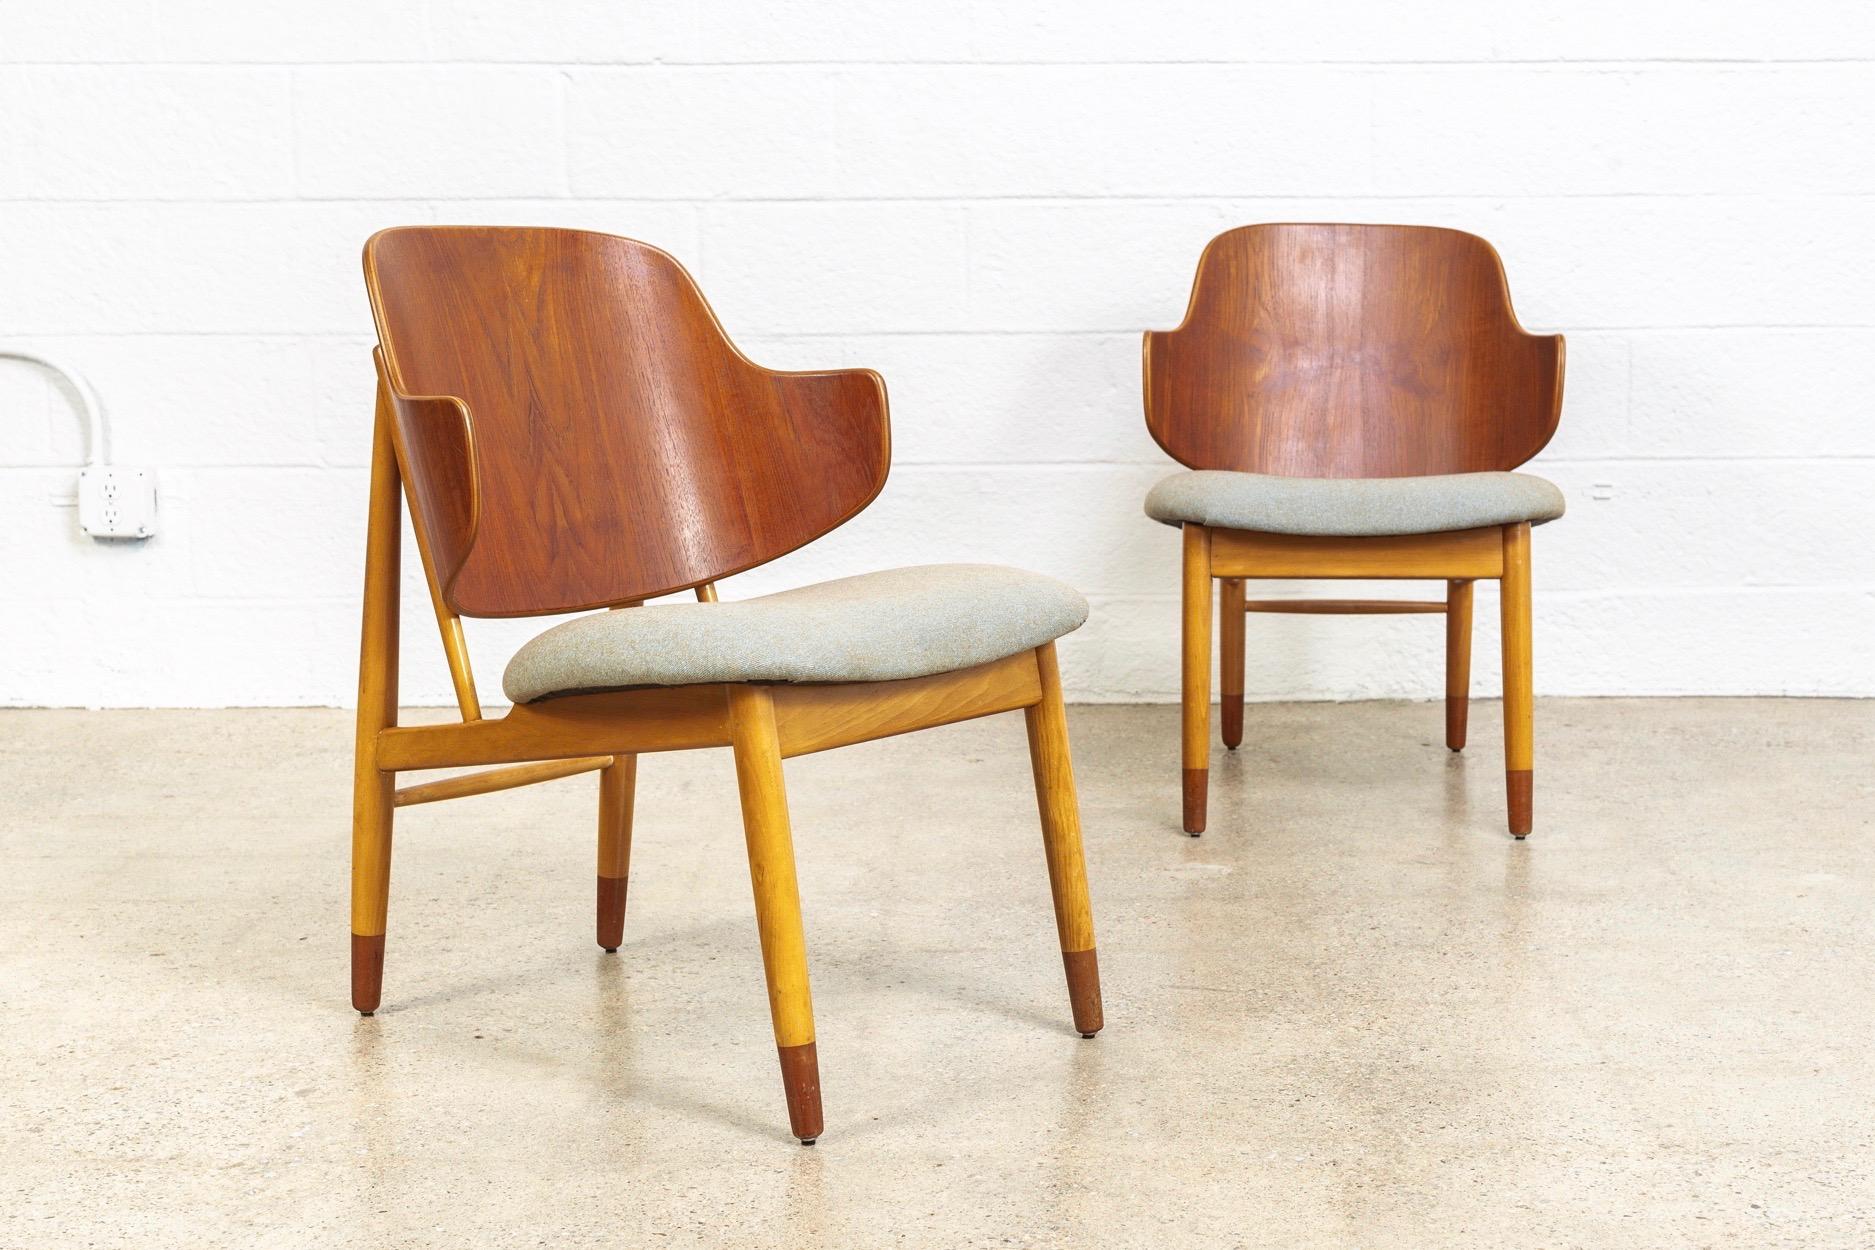 This pair of vintage midcentury Danish modern “Penguin” chairs designed by Ib Kofod Larsen in the early 1950s, were made in Denmark, circa 1960. The iconic Scandinavian Modern design features clean, Minimalist lines and gentle angles. The signature